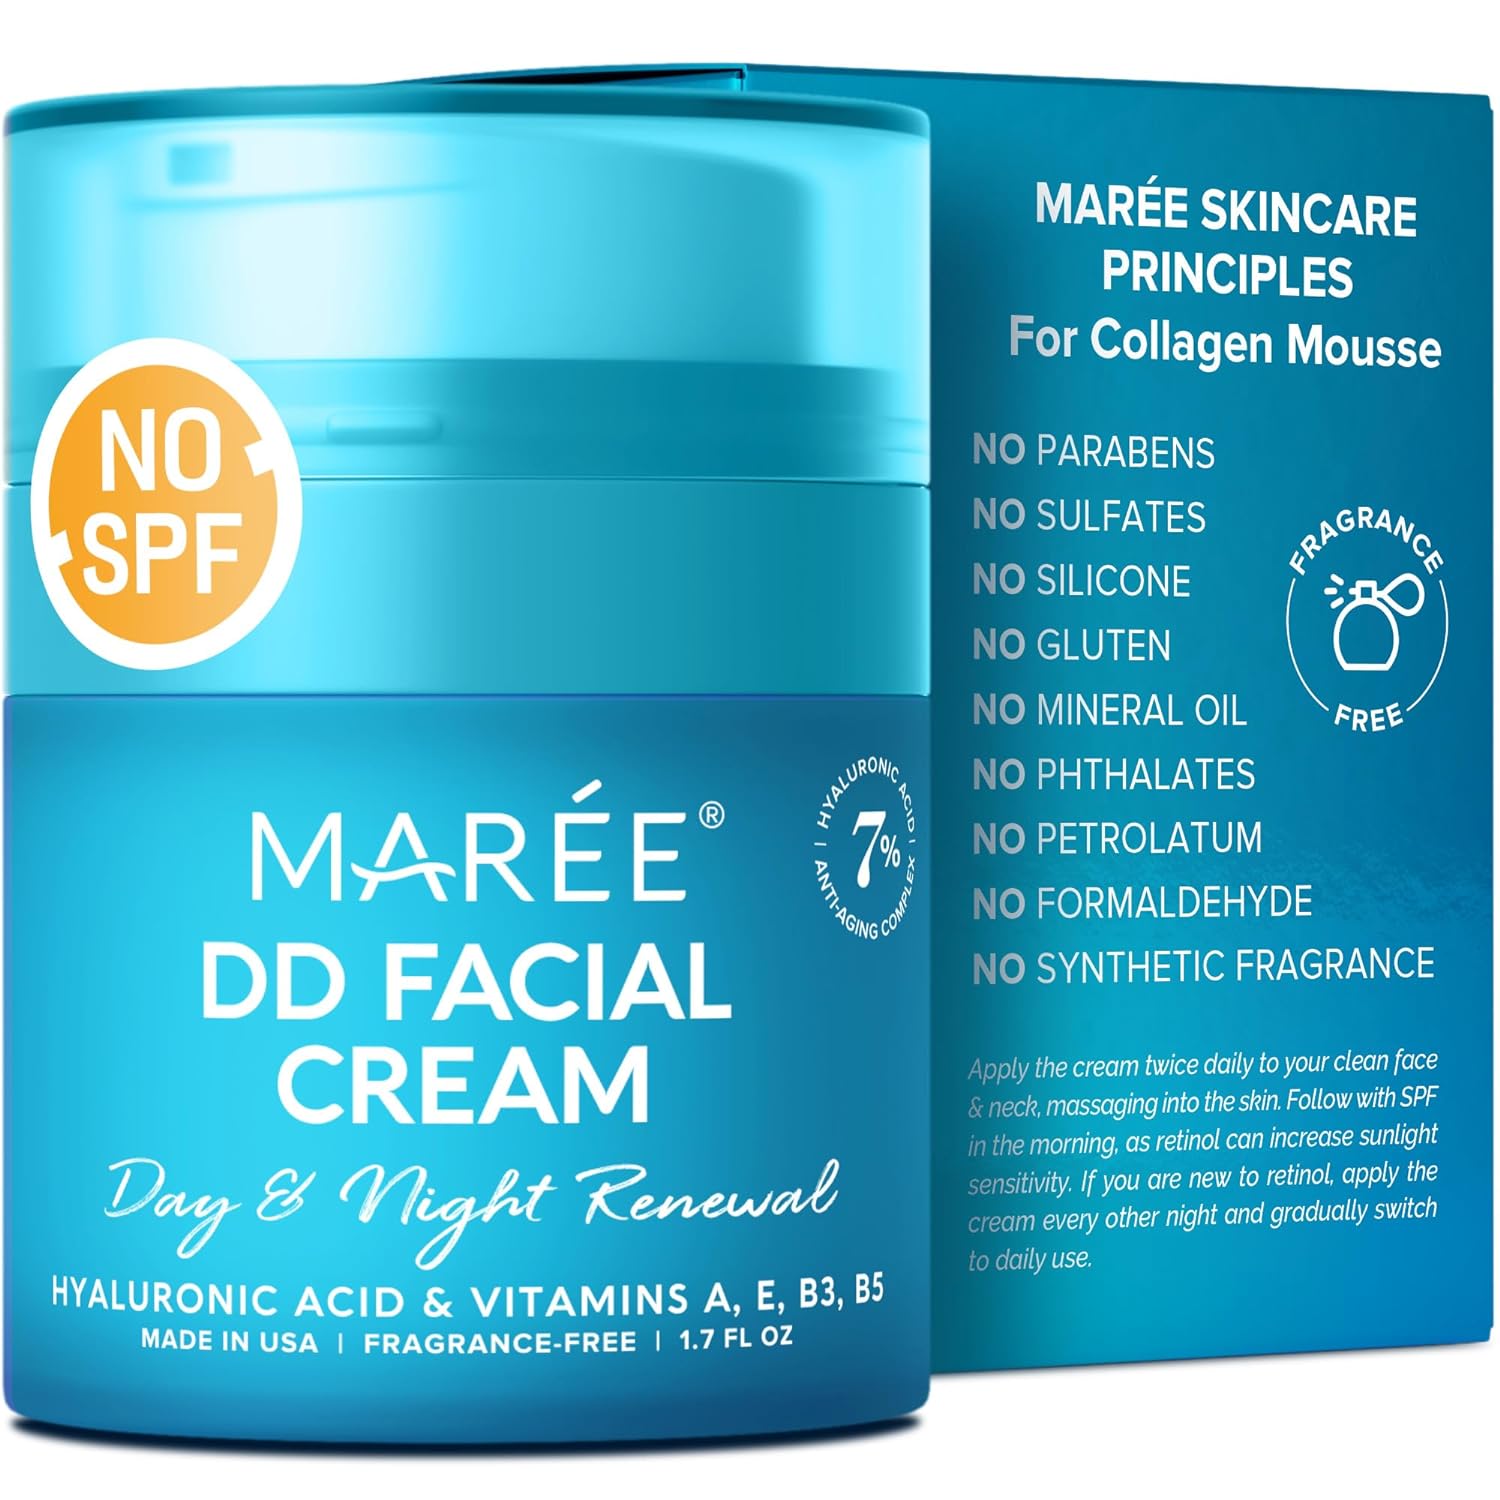 MAREE Face Moisturizer DD Collagen Cream - Anti Aging Face Cream with Hyaluronic Acid & Retinol - DD Cream with Hydrating Effect - Moisturizing Cream for Face with Vitamins A & E - 1.7oz